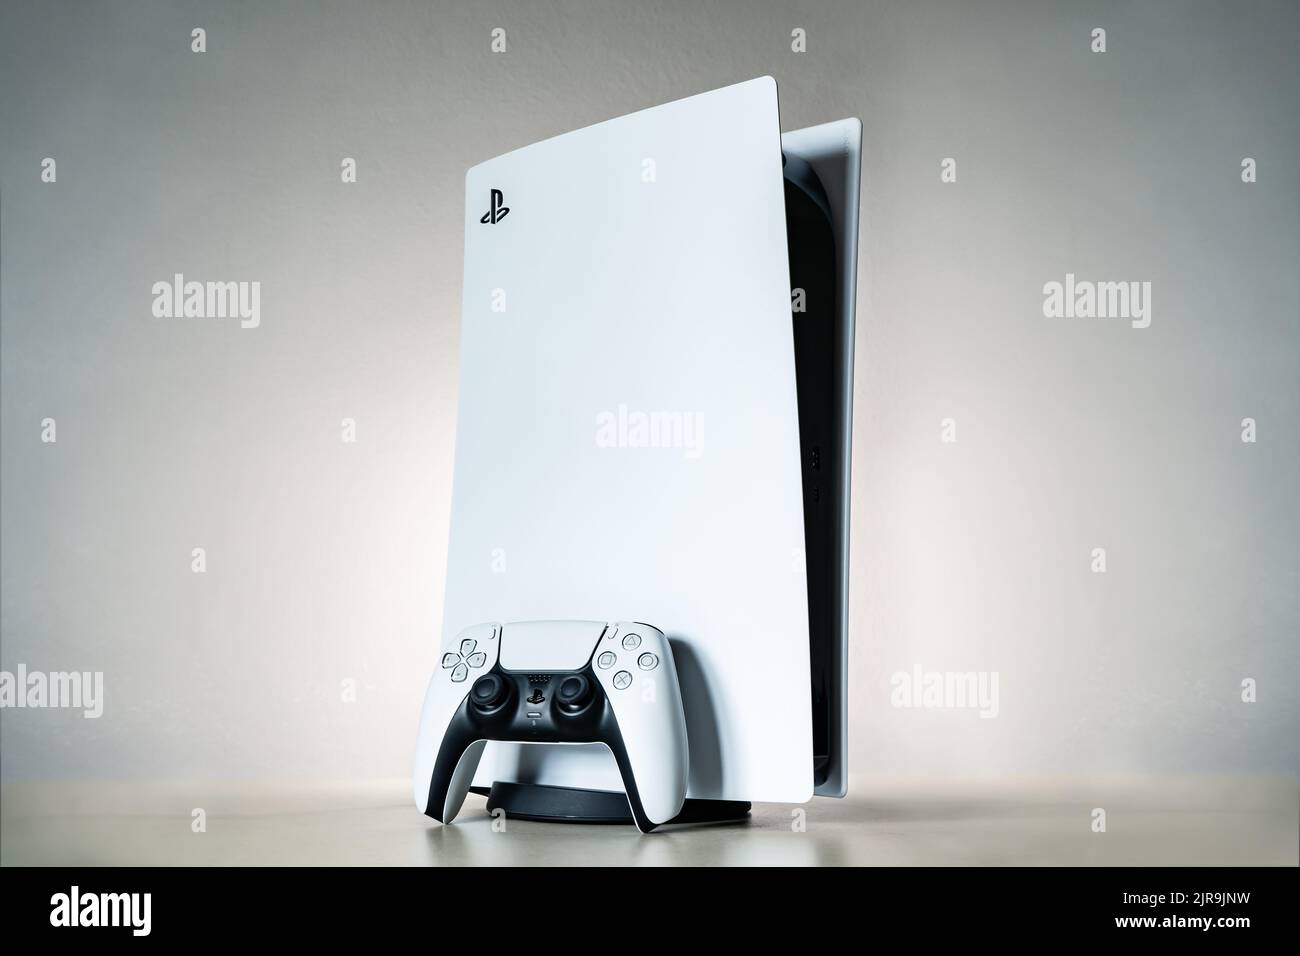 Bangkok, Thailand - August 22, 2022: PlayStation 5 is a video game console developed by Sony Interactive Entertainment. Stock Photo